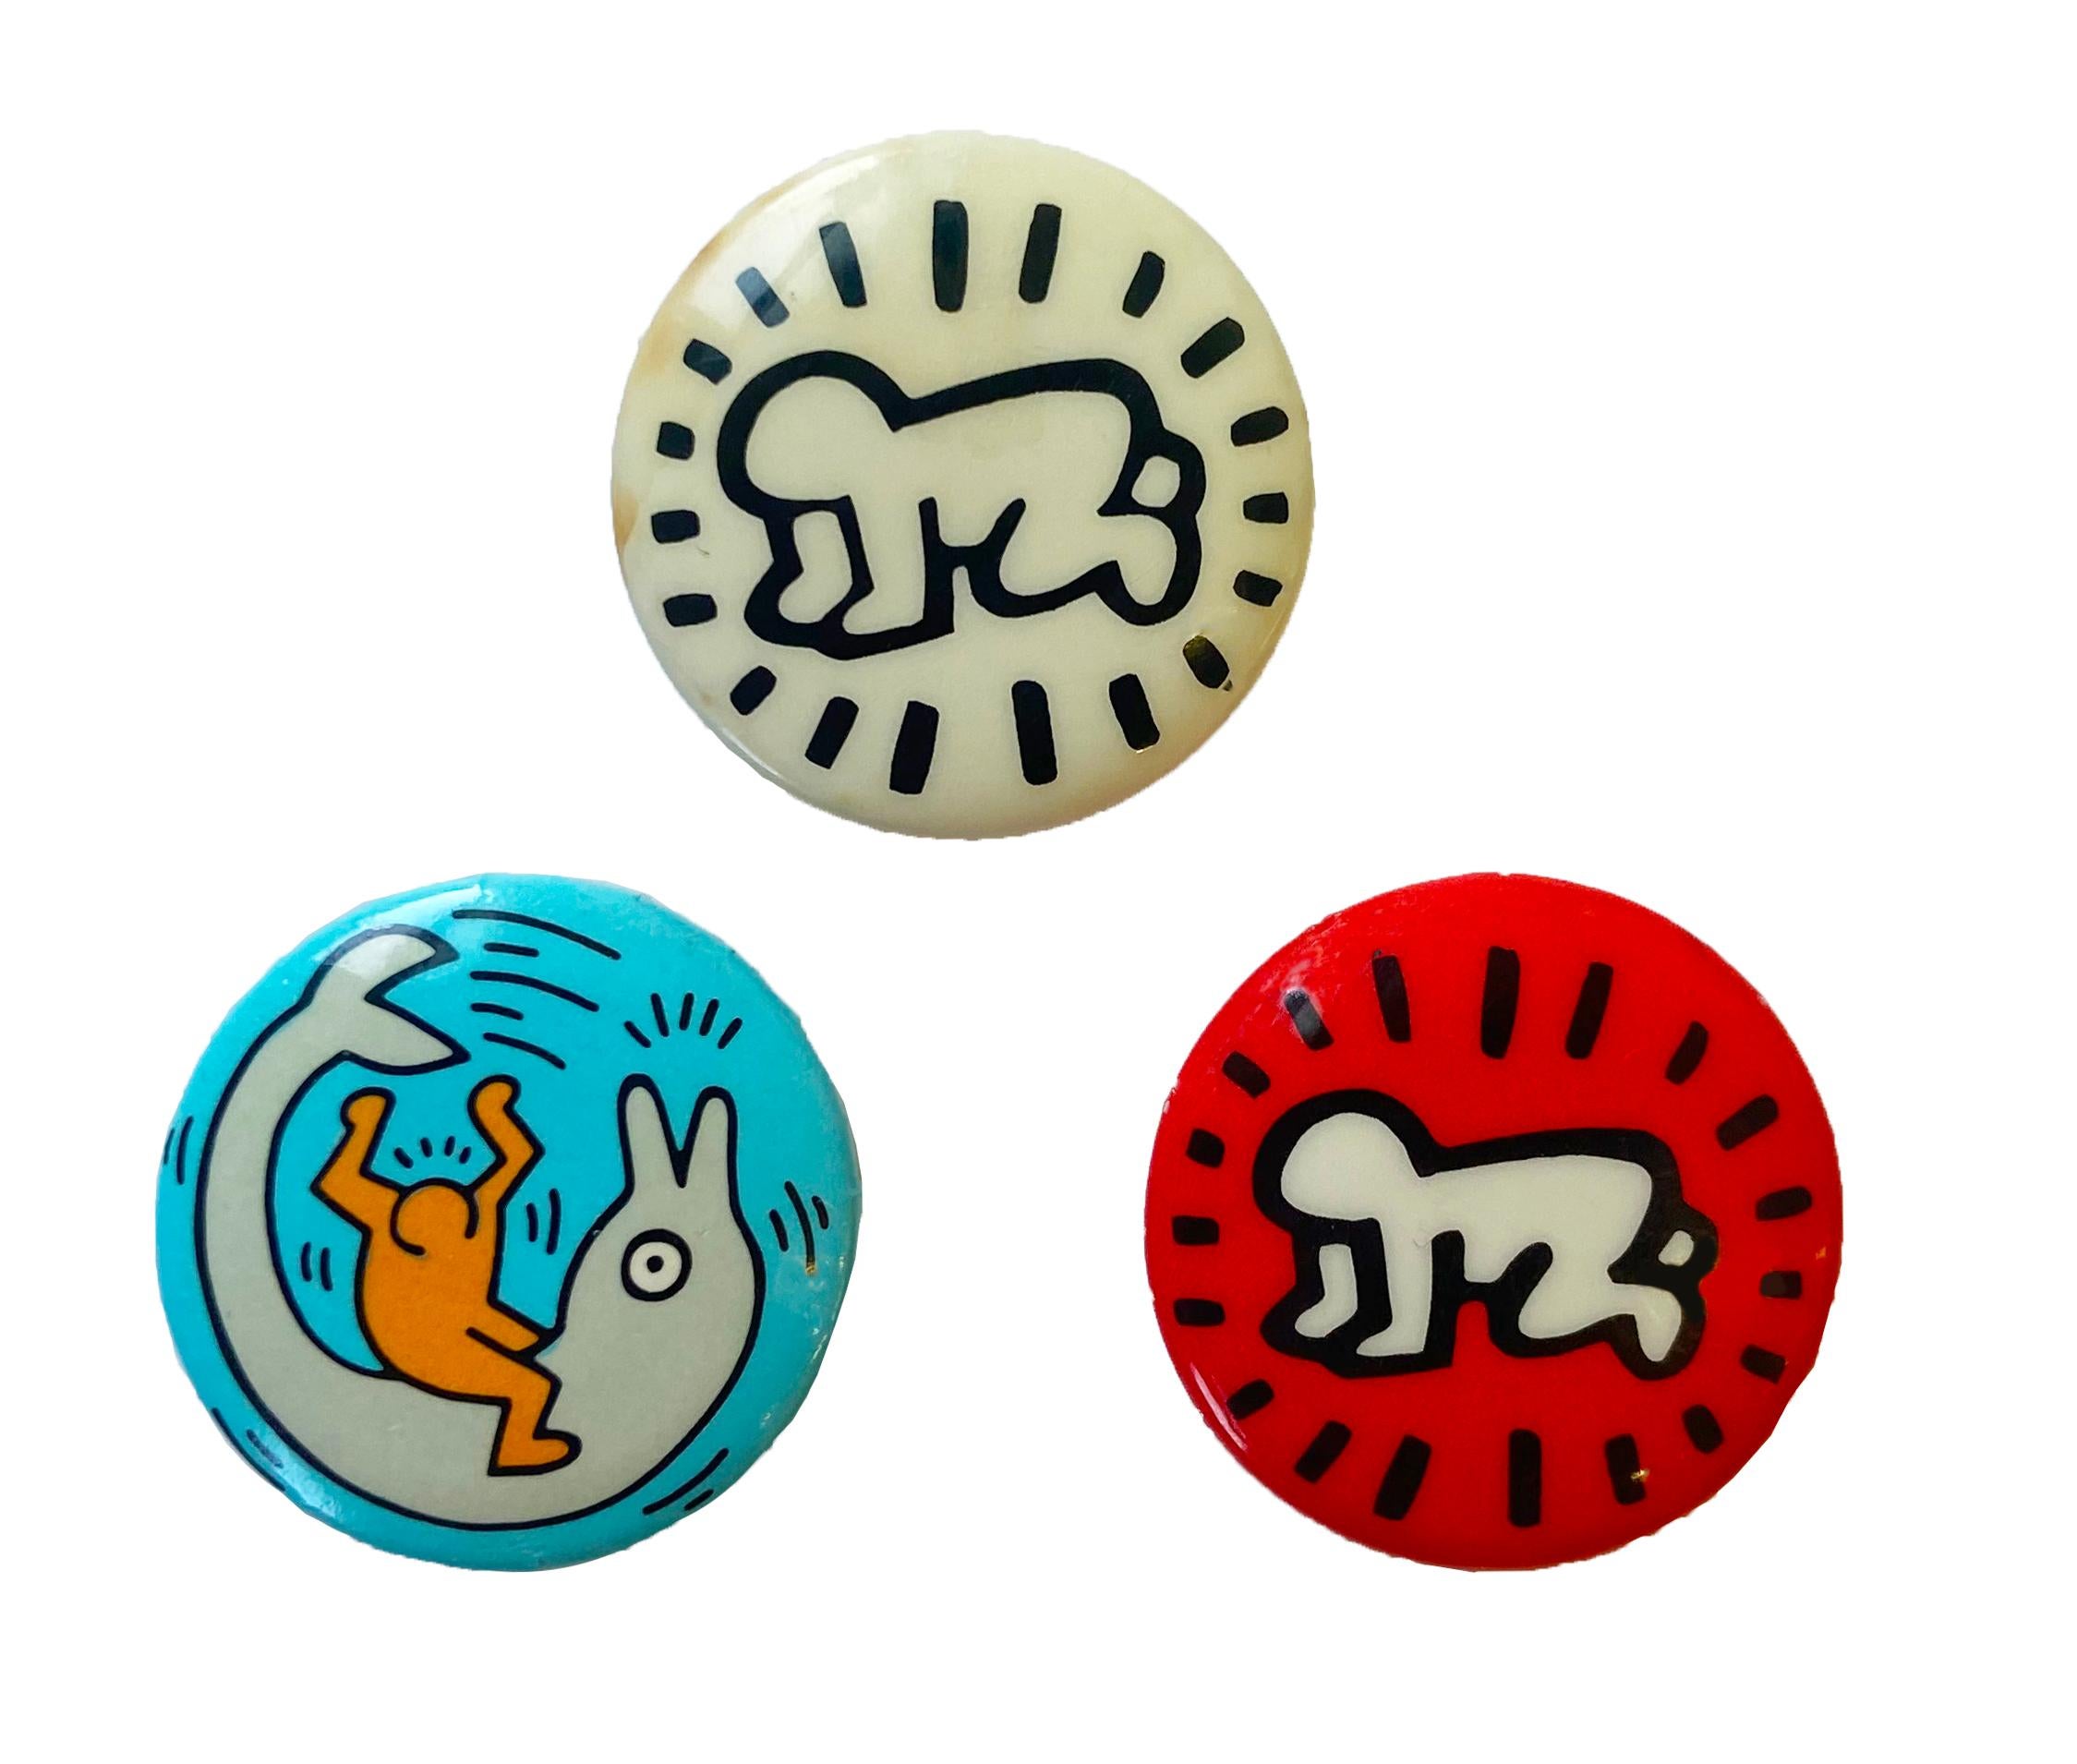 Keith Haring Pop Shop Collection (c.1986-1992) 7